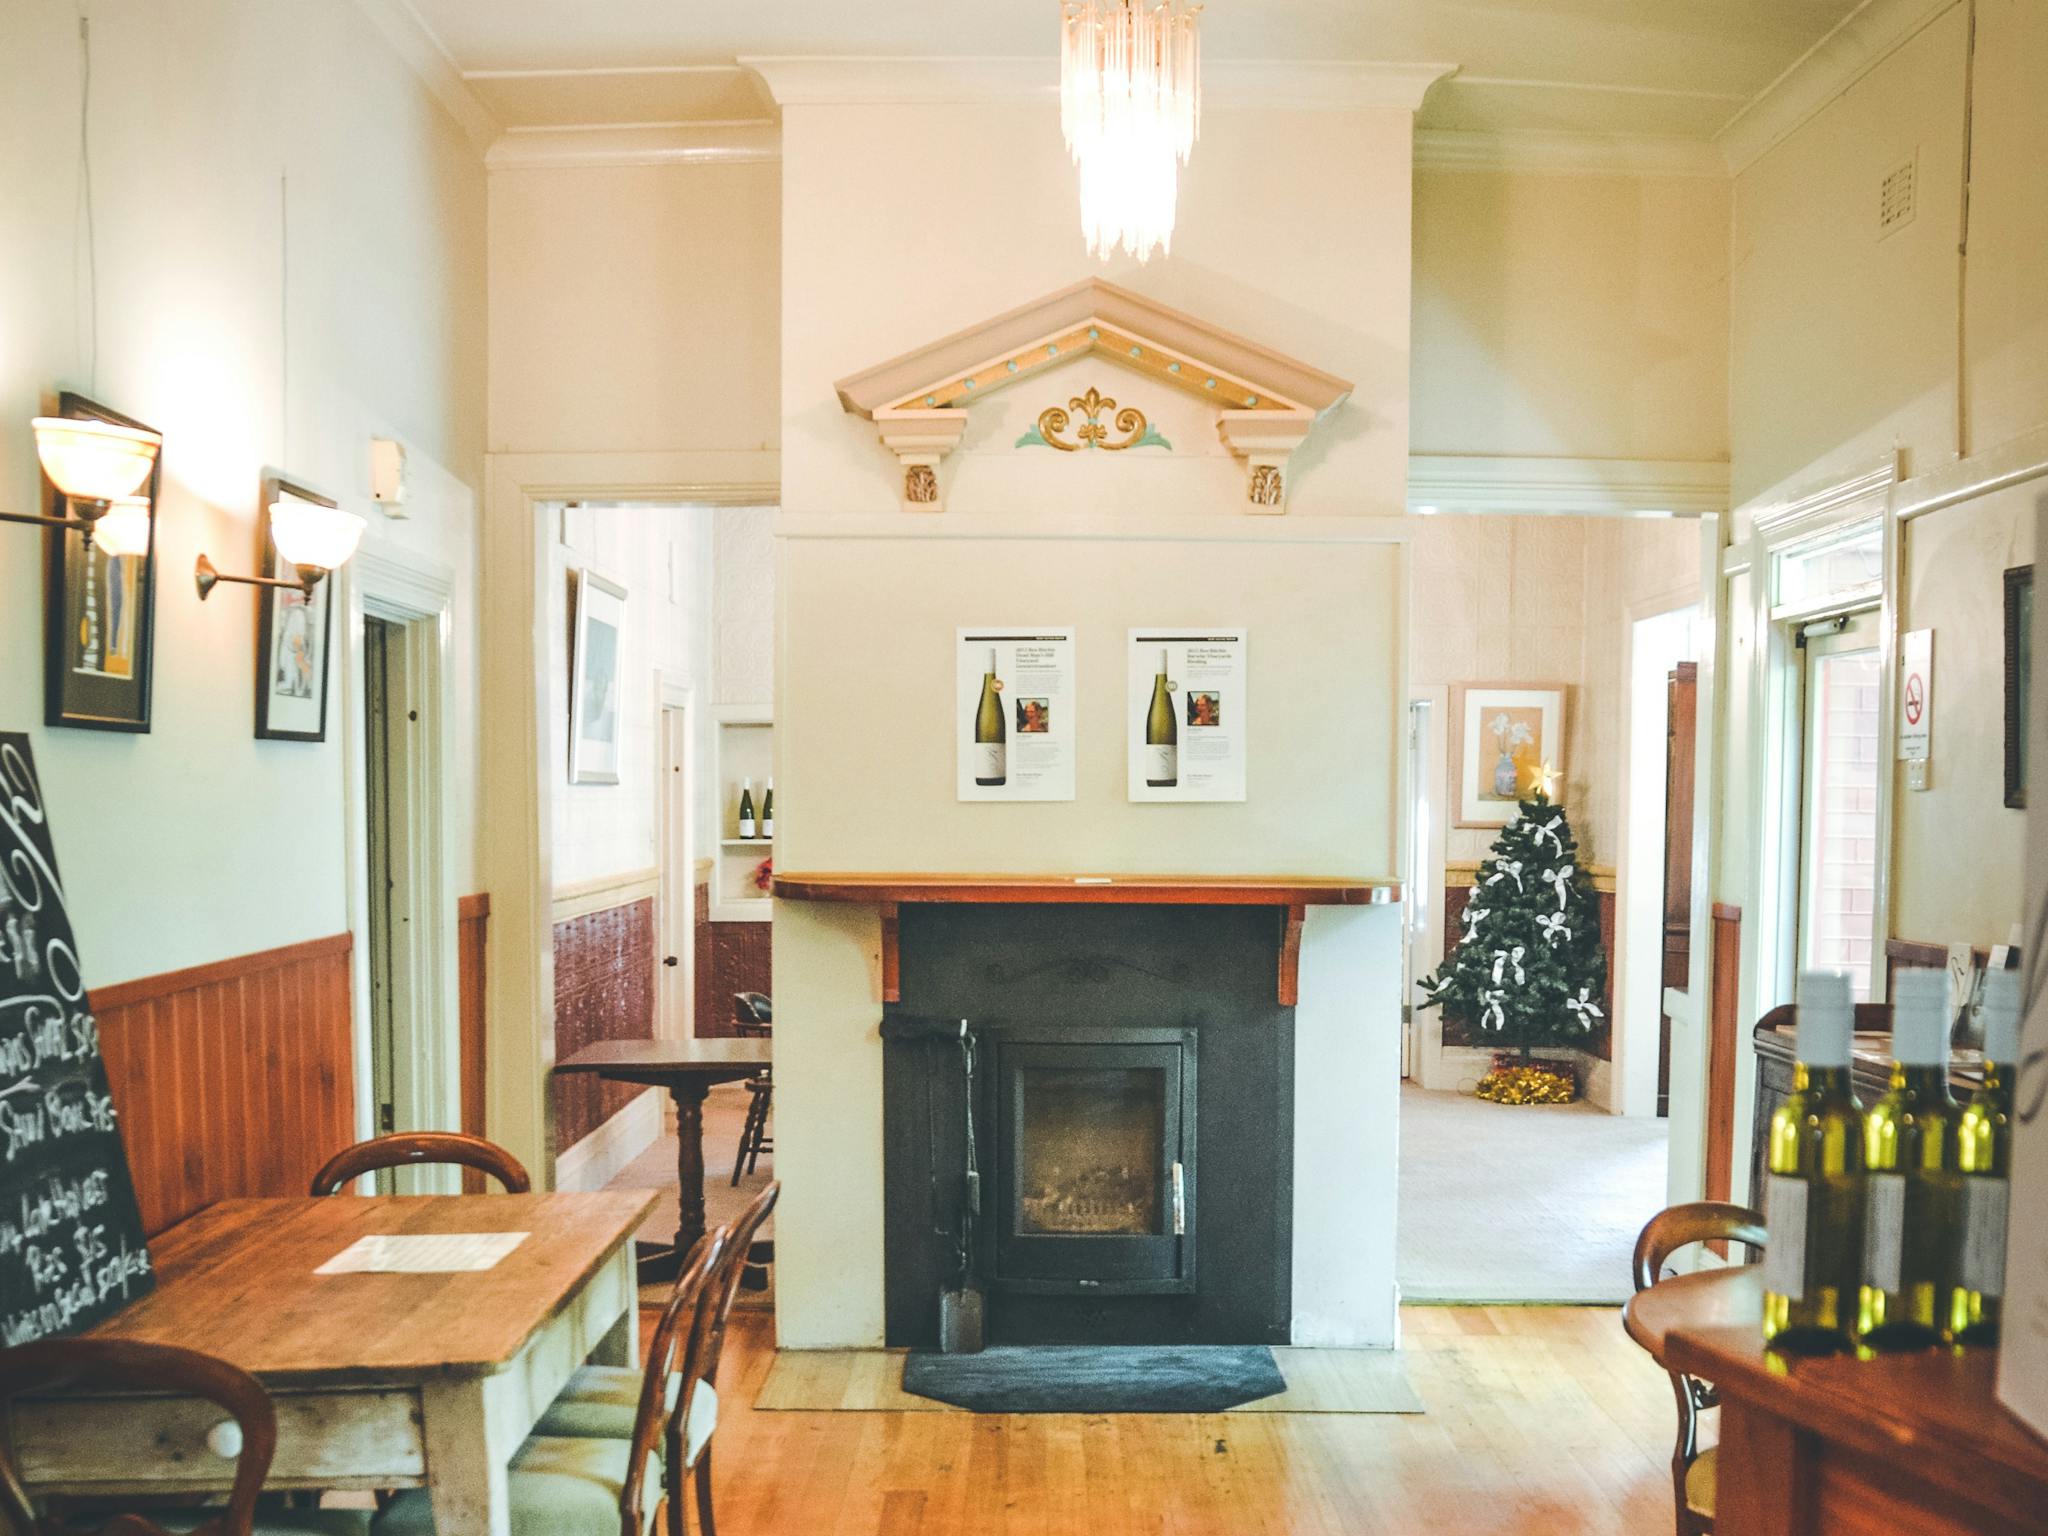 Ros Ritchie Wines Cellar Door is housed in the historic Magnolia House on Mt Buller Rd Mansfield